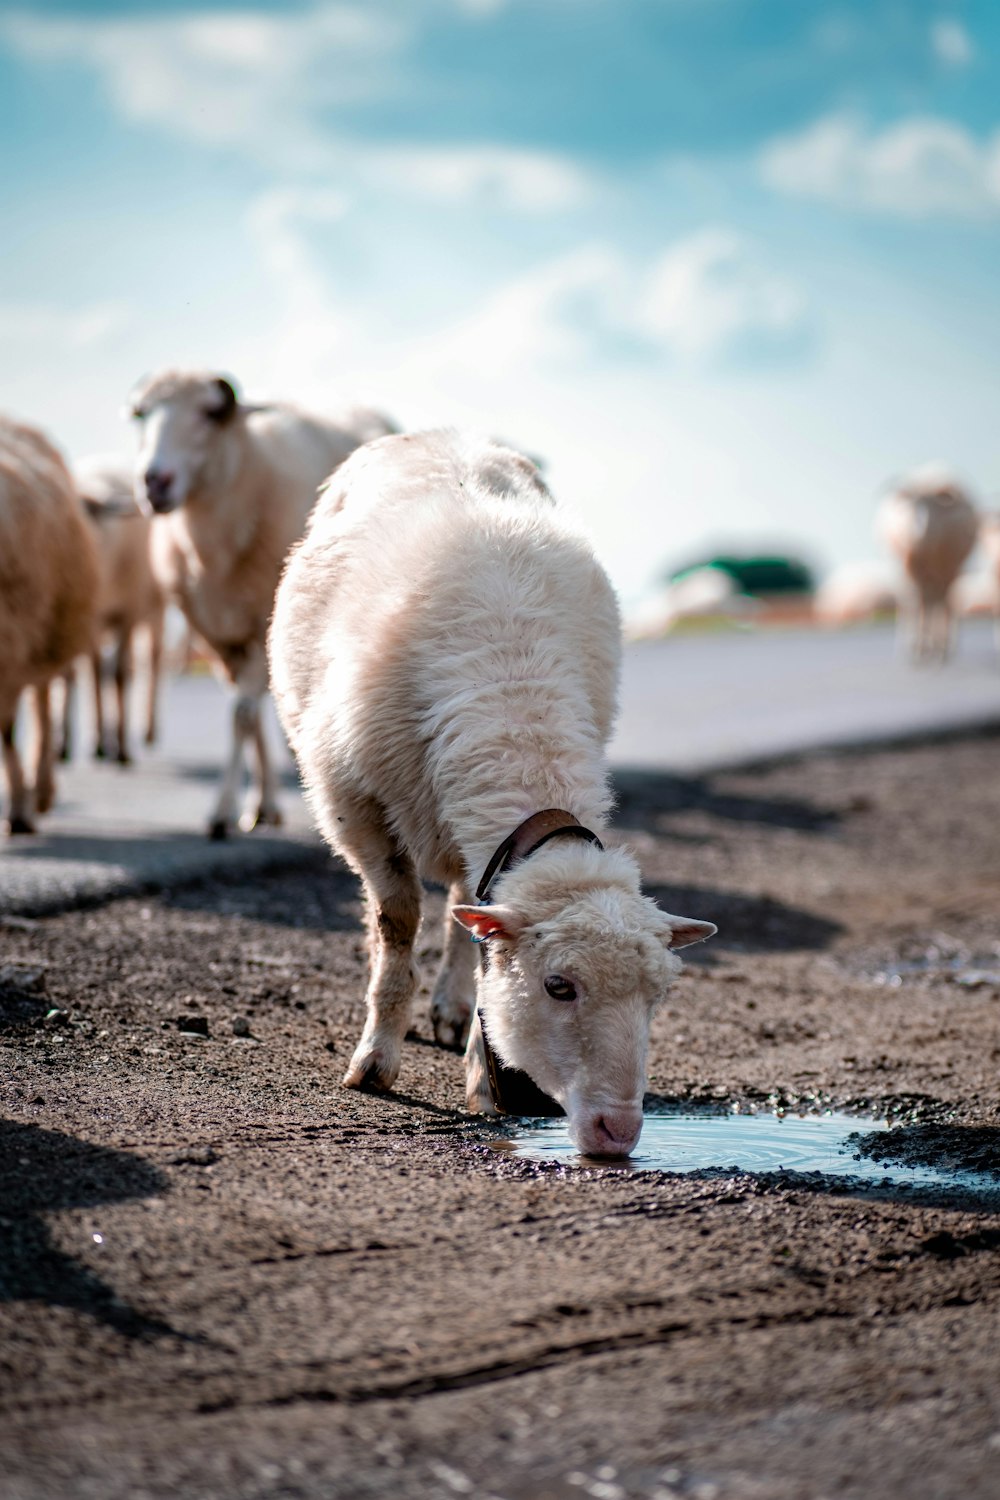 a herd of sheep drinking water from a puddle